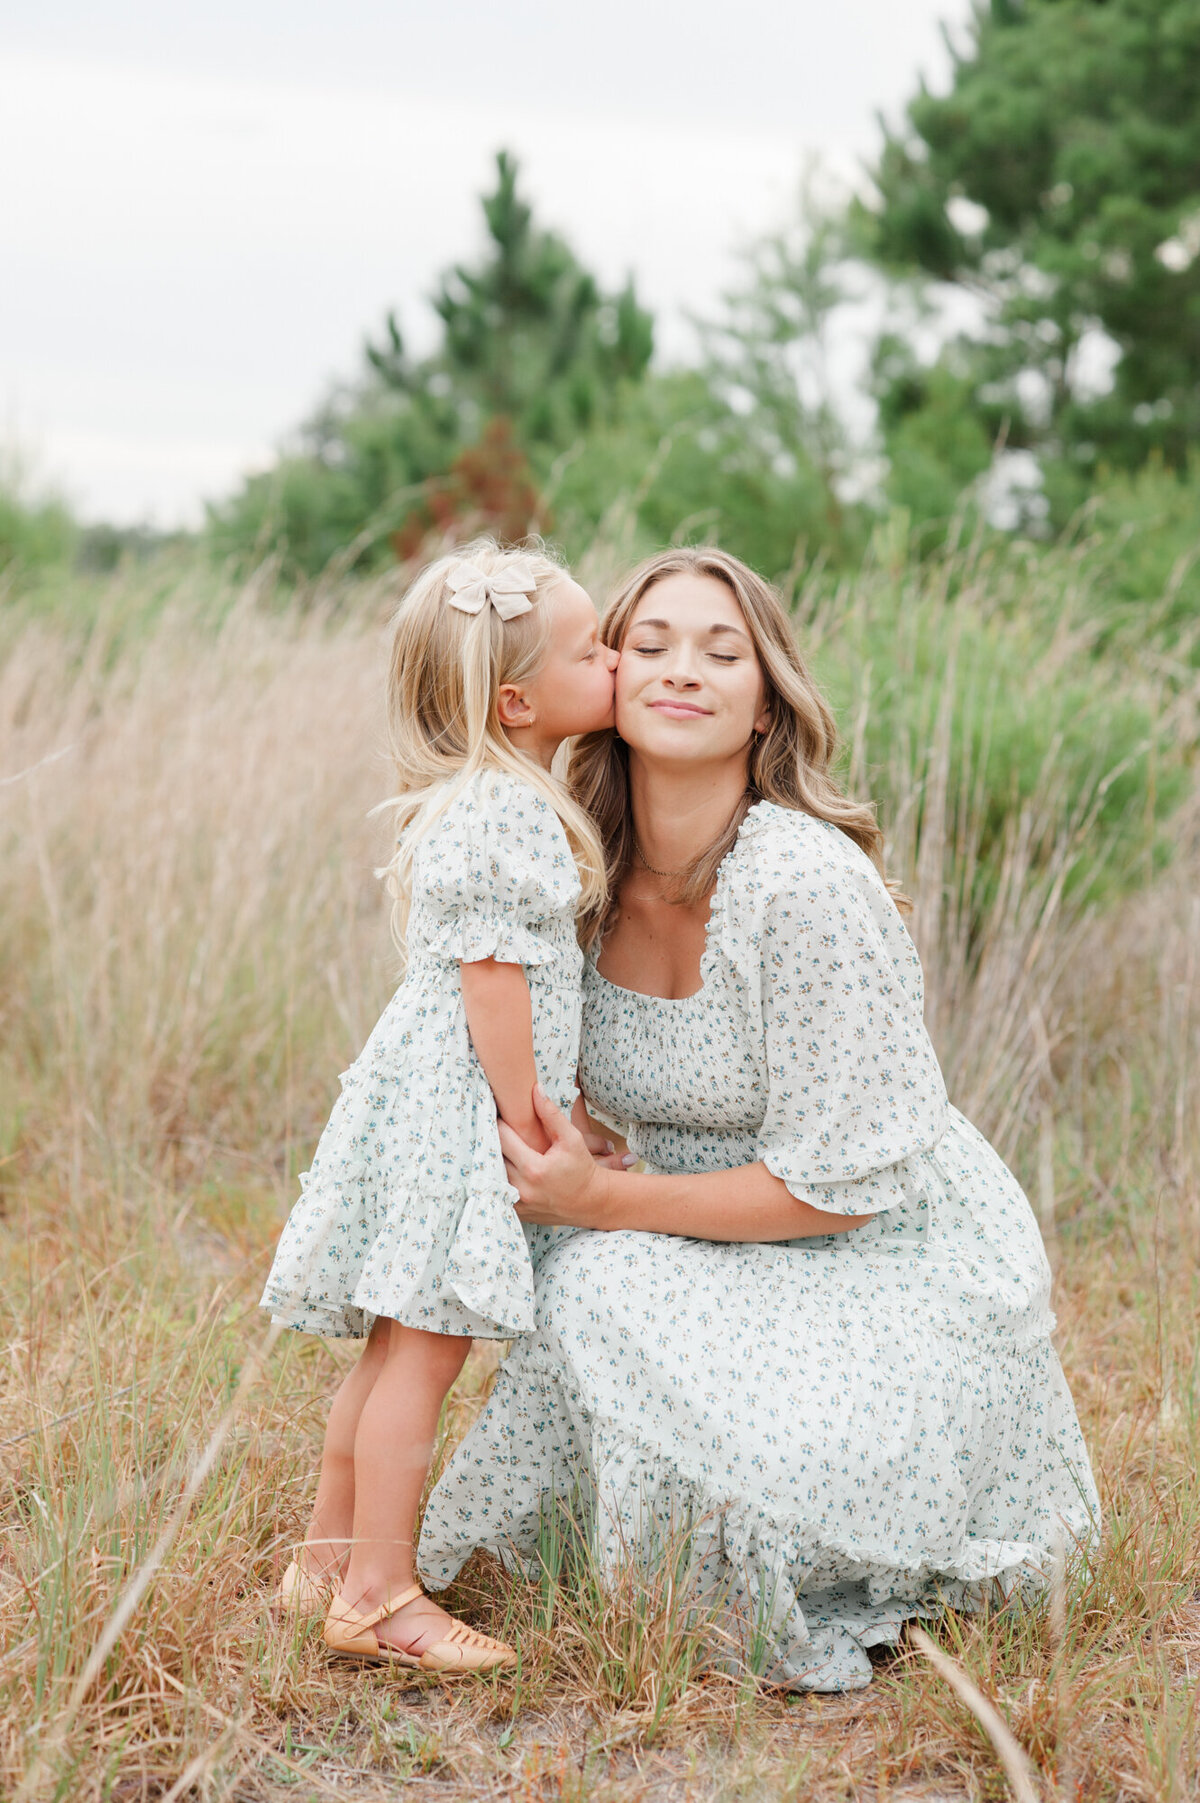 Young daughter kissing moms cheek in a tall grass field at sunset